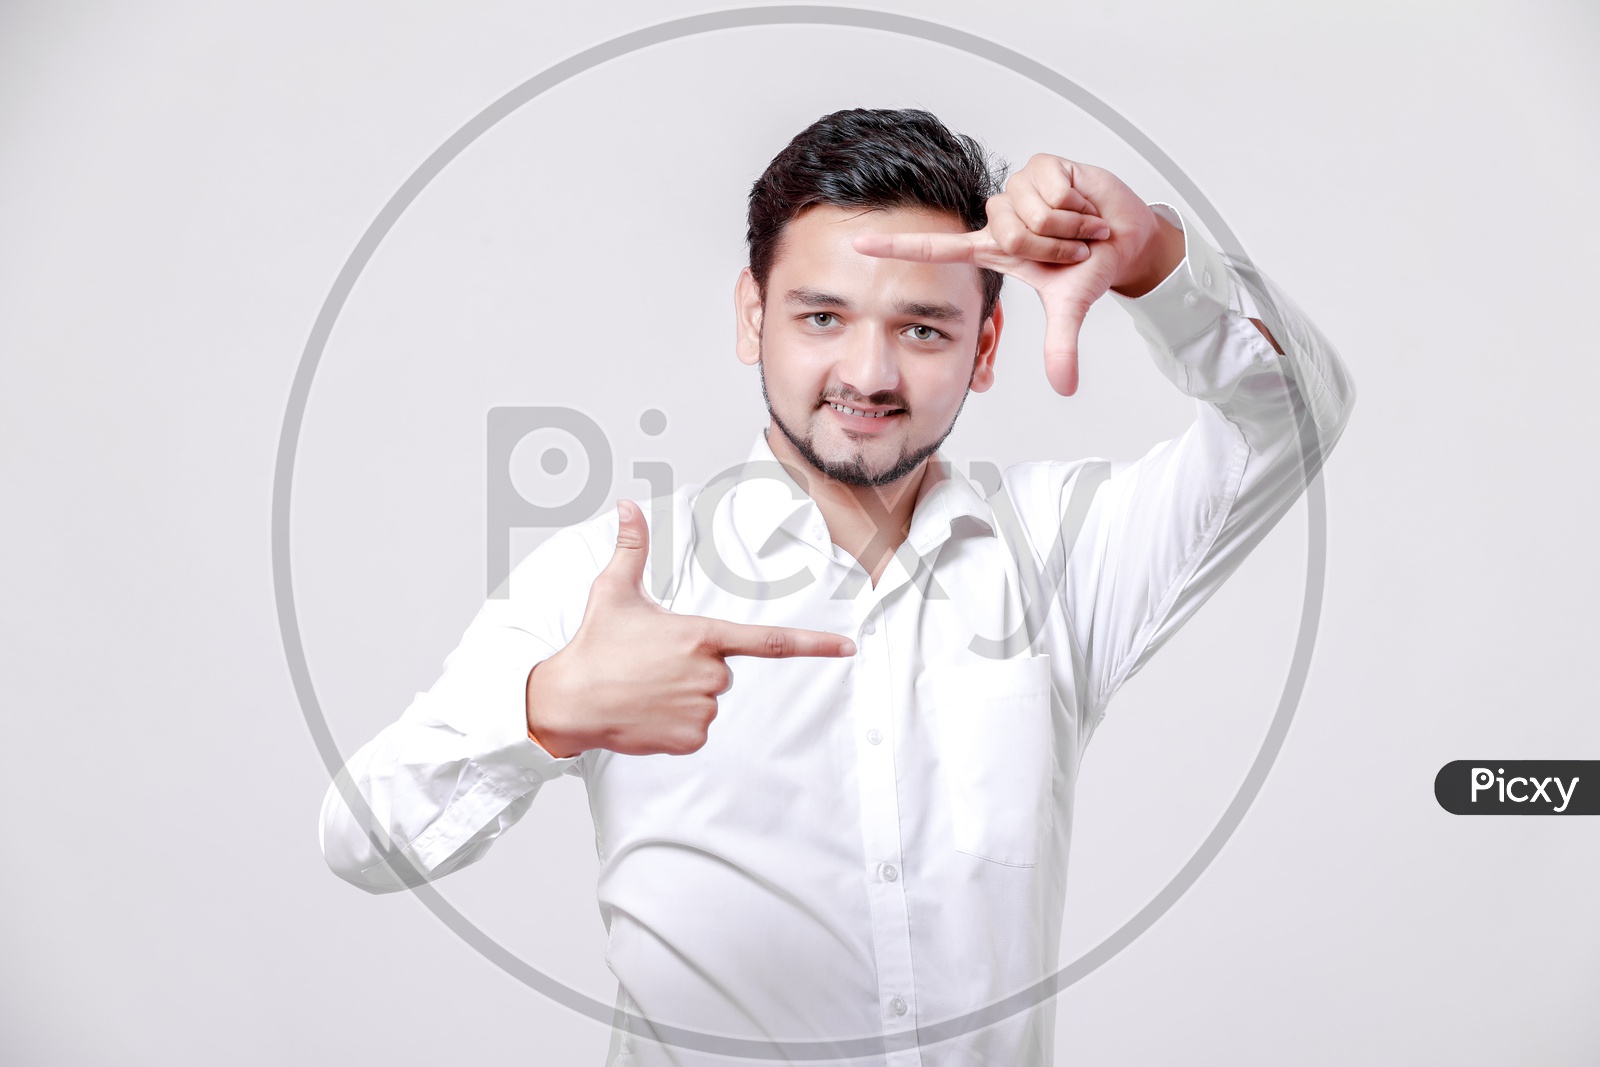 Indian Young Professional Man With a Smiling Face and With Gestures   On an Isolated White Background